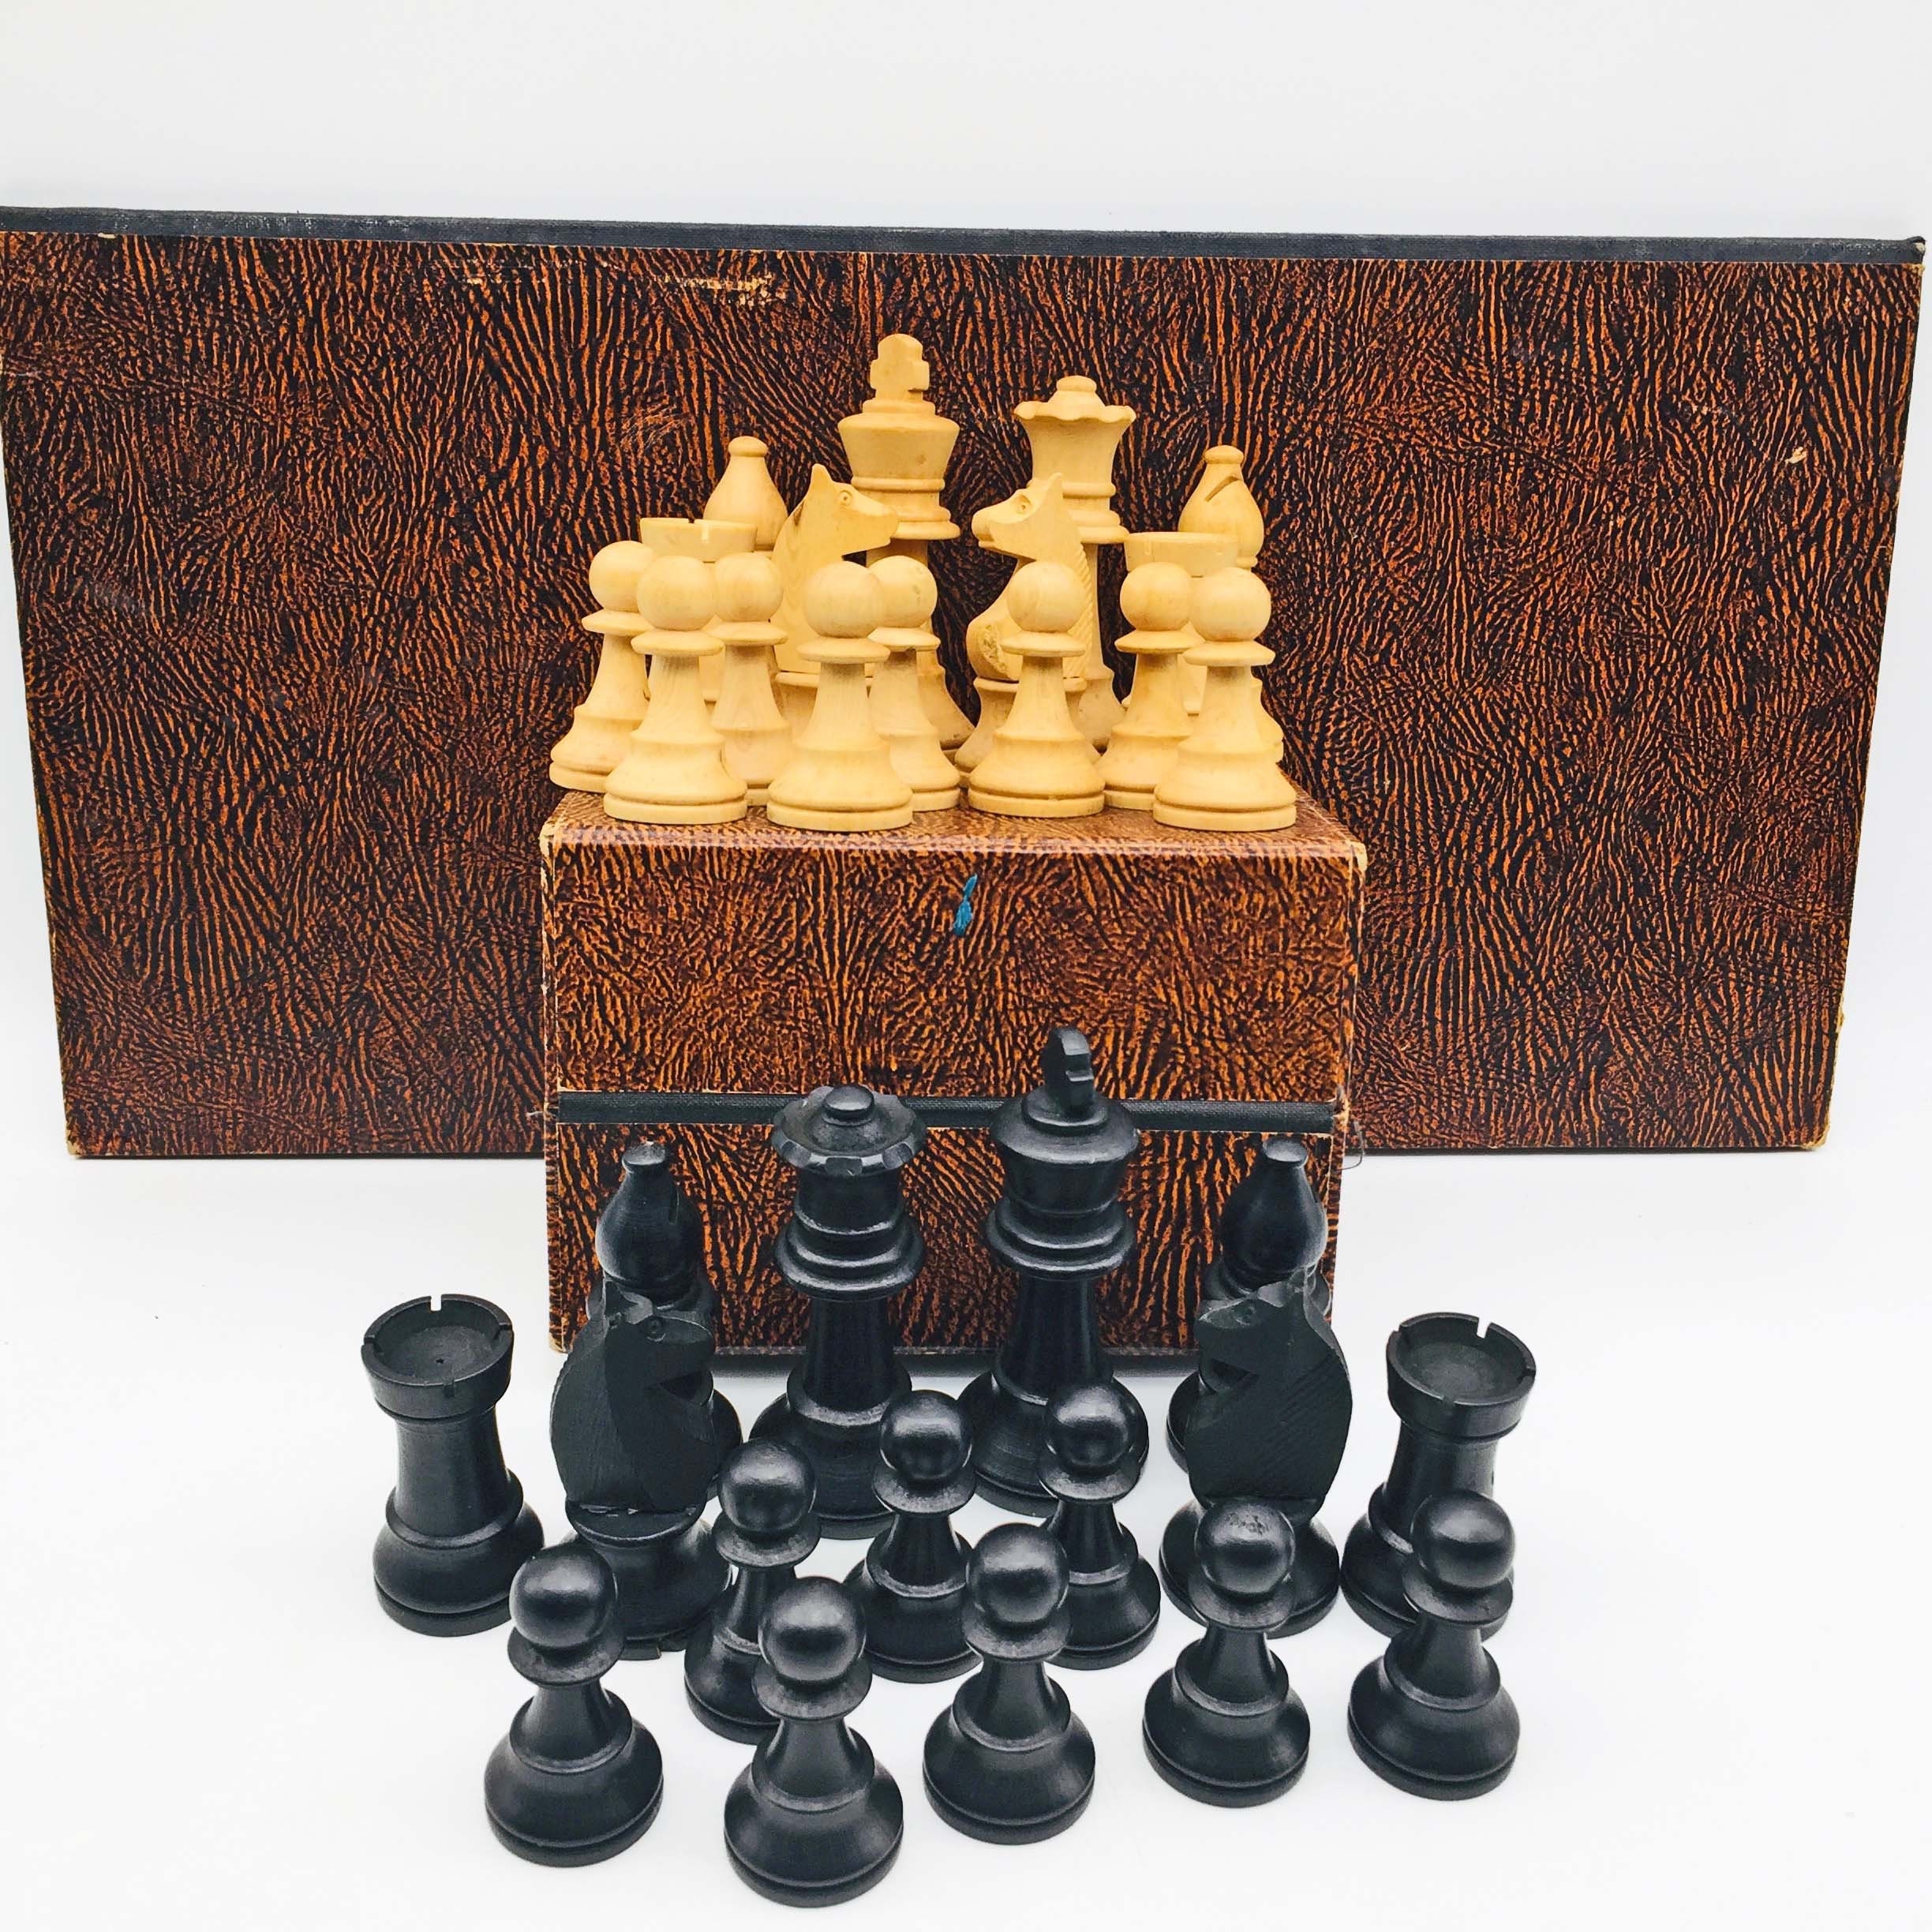 Wooden Folding Chess Set Pieces Vintage Storage Large Tournament Game Play Board 